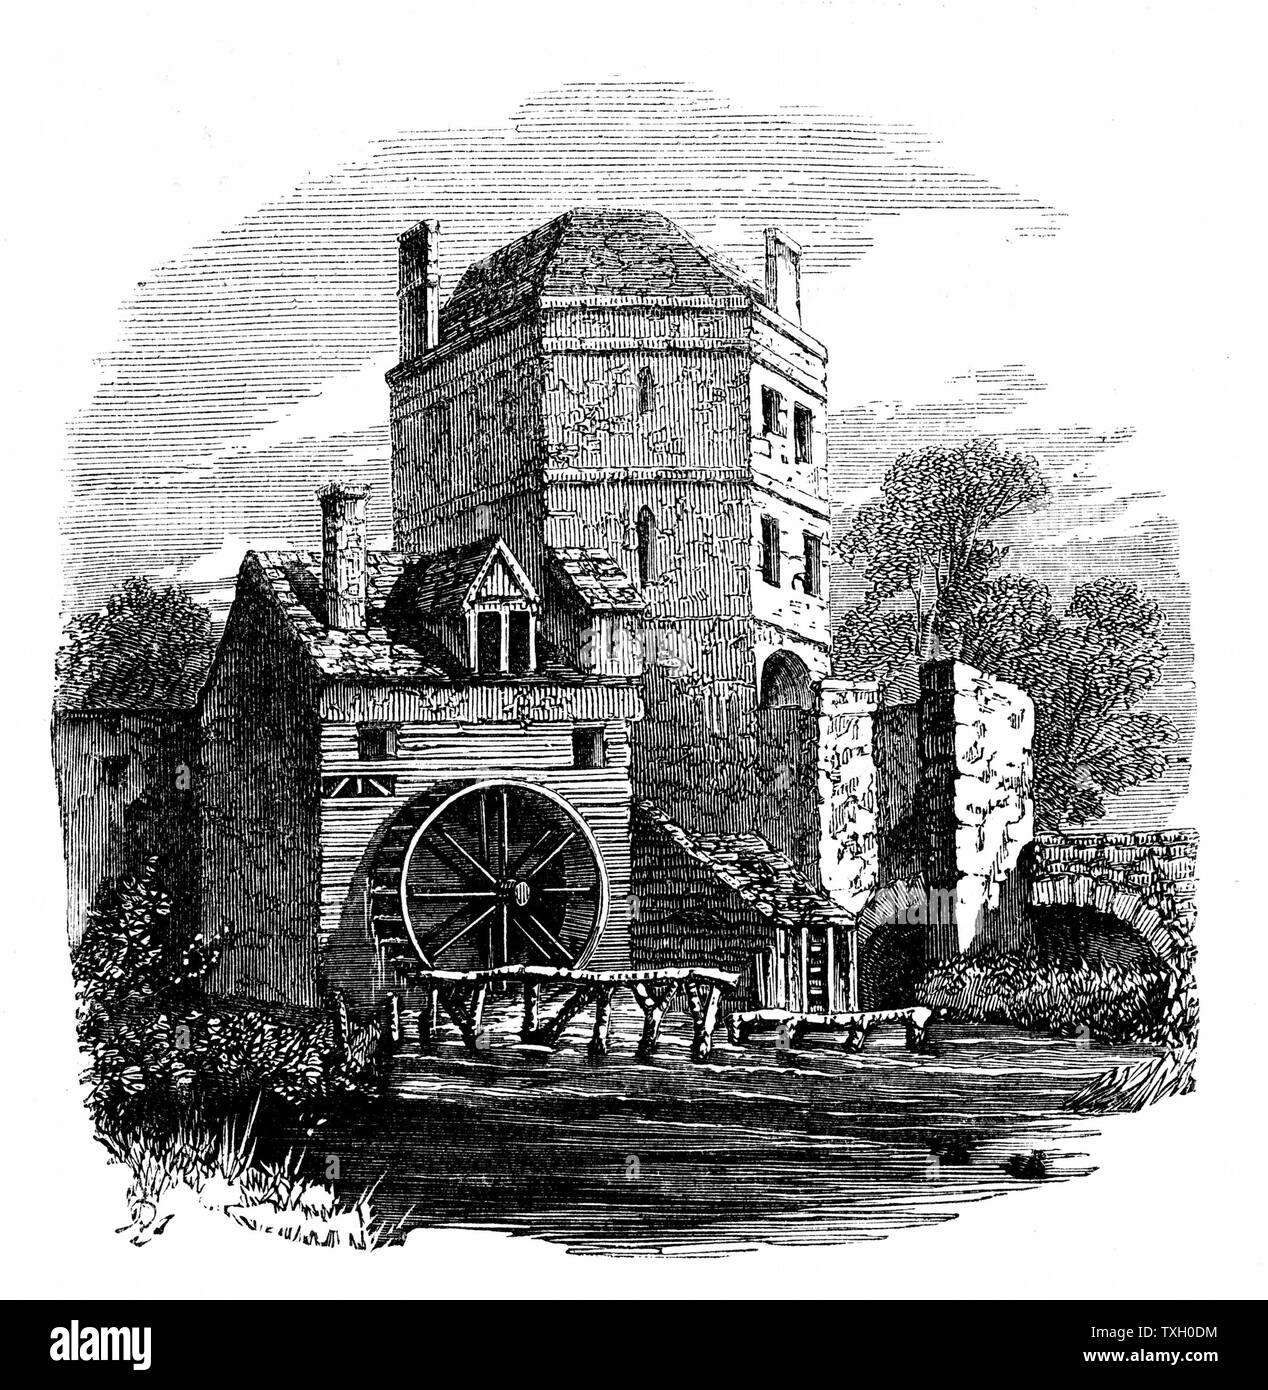 Roger Bacon (c1214-92) English experimental scientist, philosopher and Franciscan (Grey Friar);  called 'Doctor Mirabilis'. Tower of Franciscan friary, Oxford, where Bacon had his study. Wood engraving c1860 Stock Photo